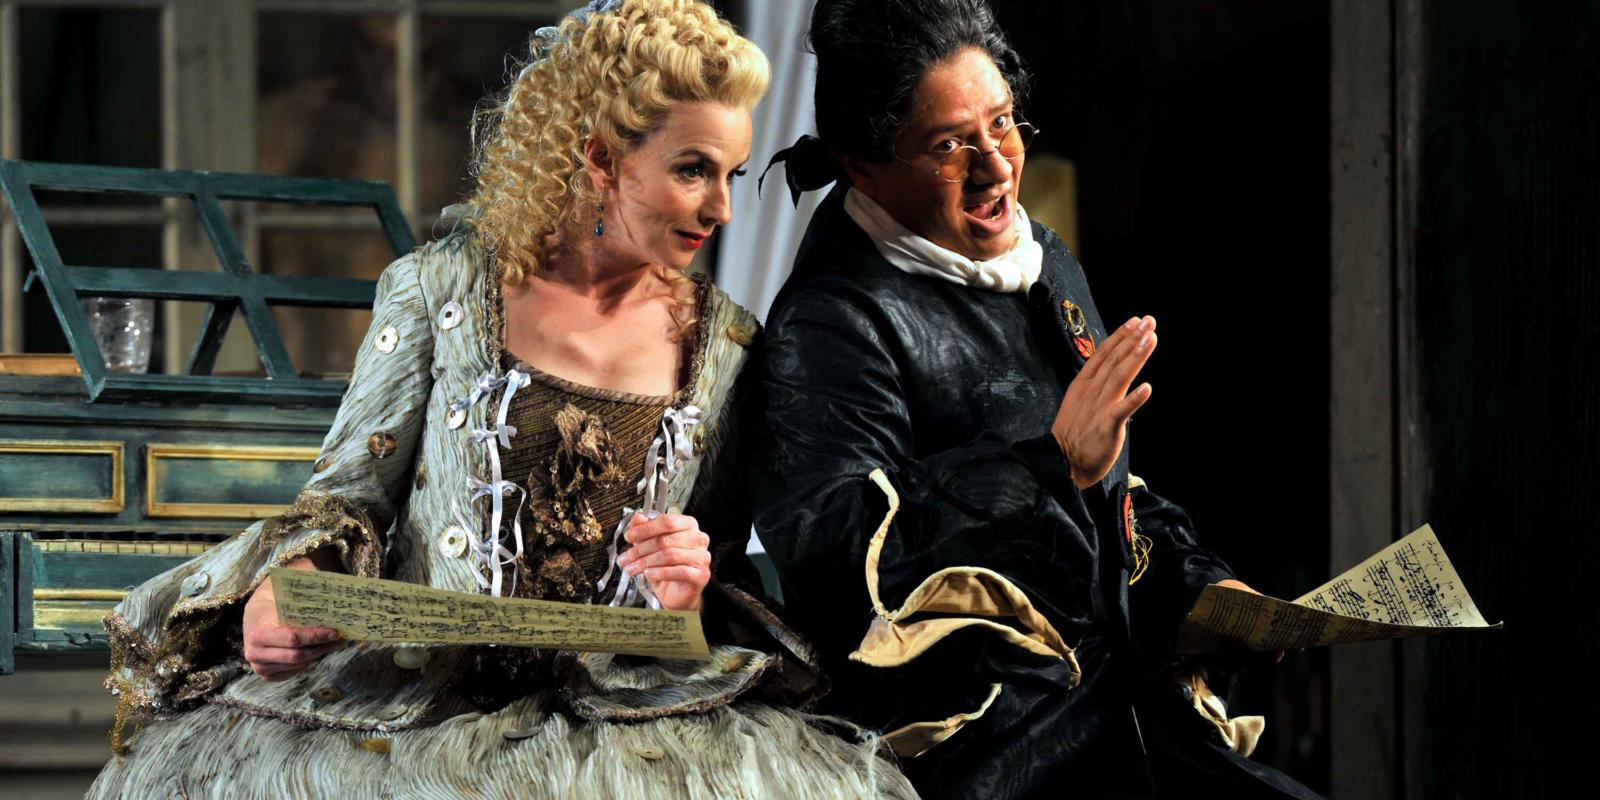 ENO The Barber of Seville: Sarah Tynan and Eleazar Rodriguez in character on stage (c) Robbie Jack